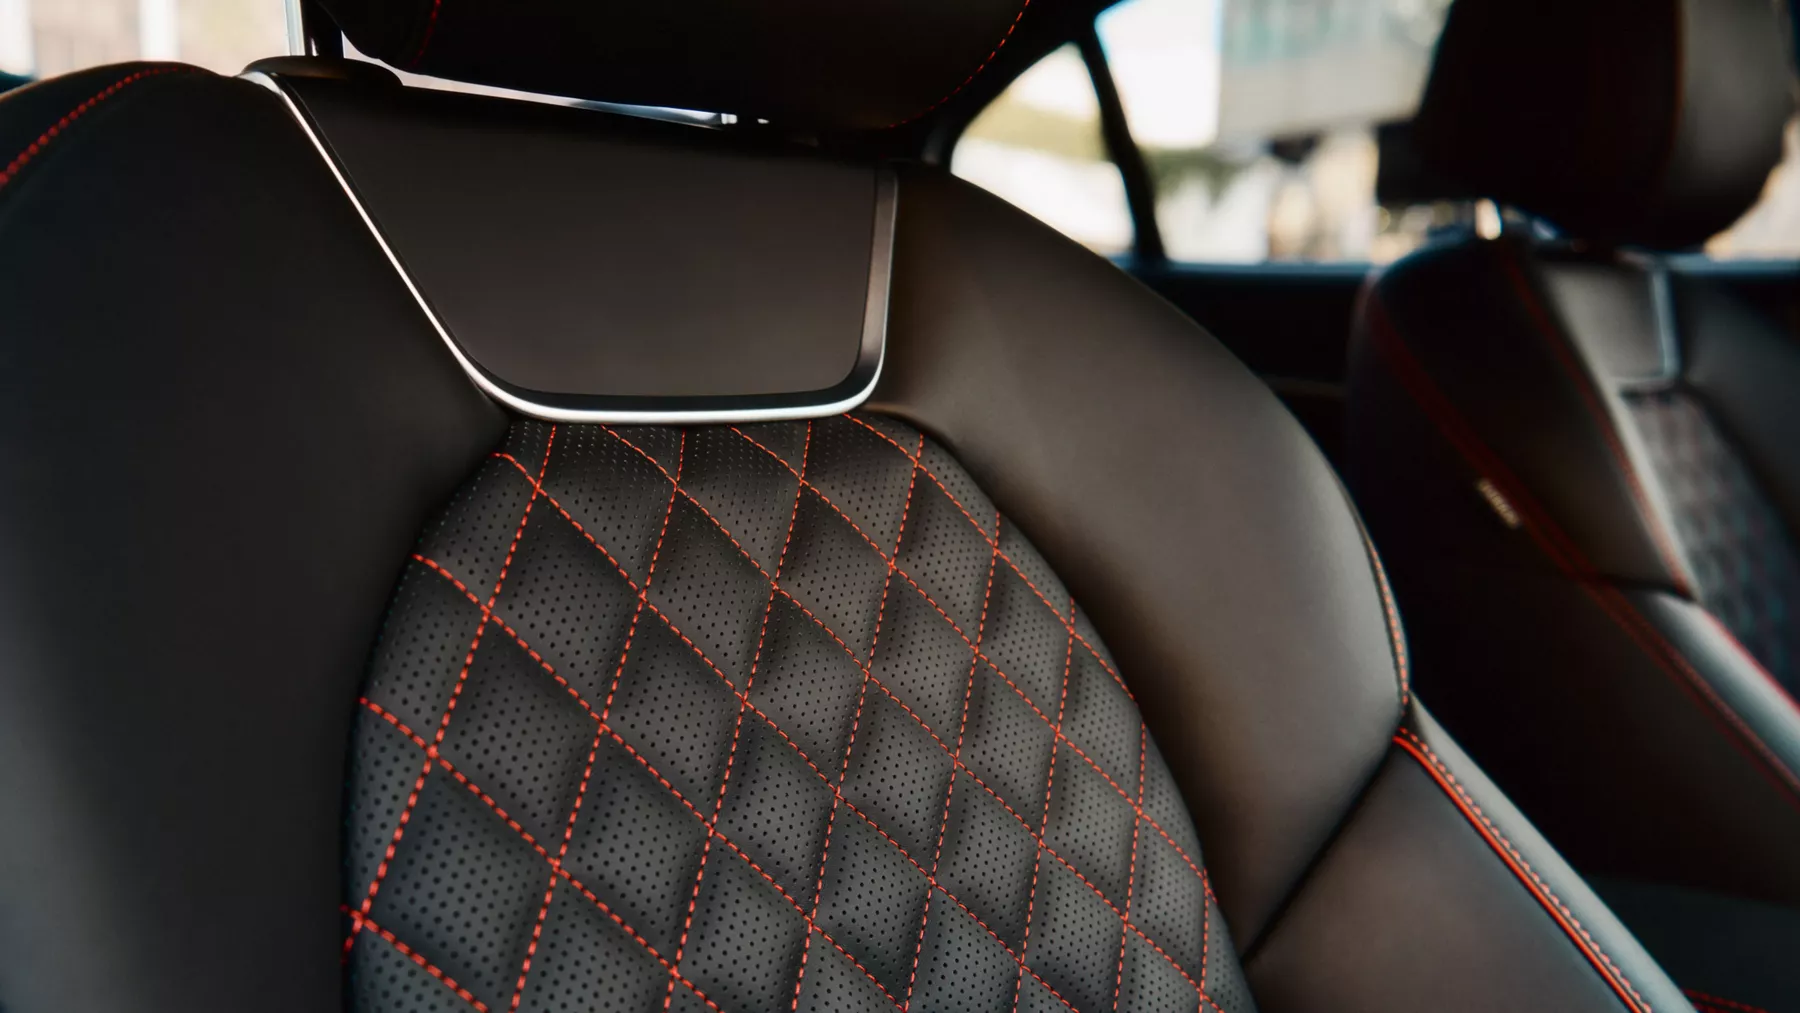 Black G70 front seats with red diamond stitching. 